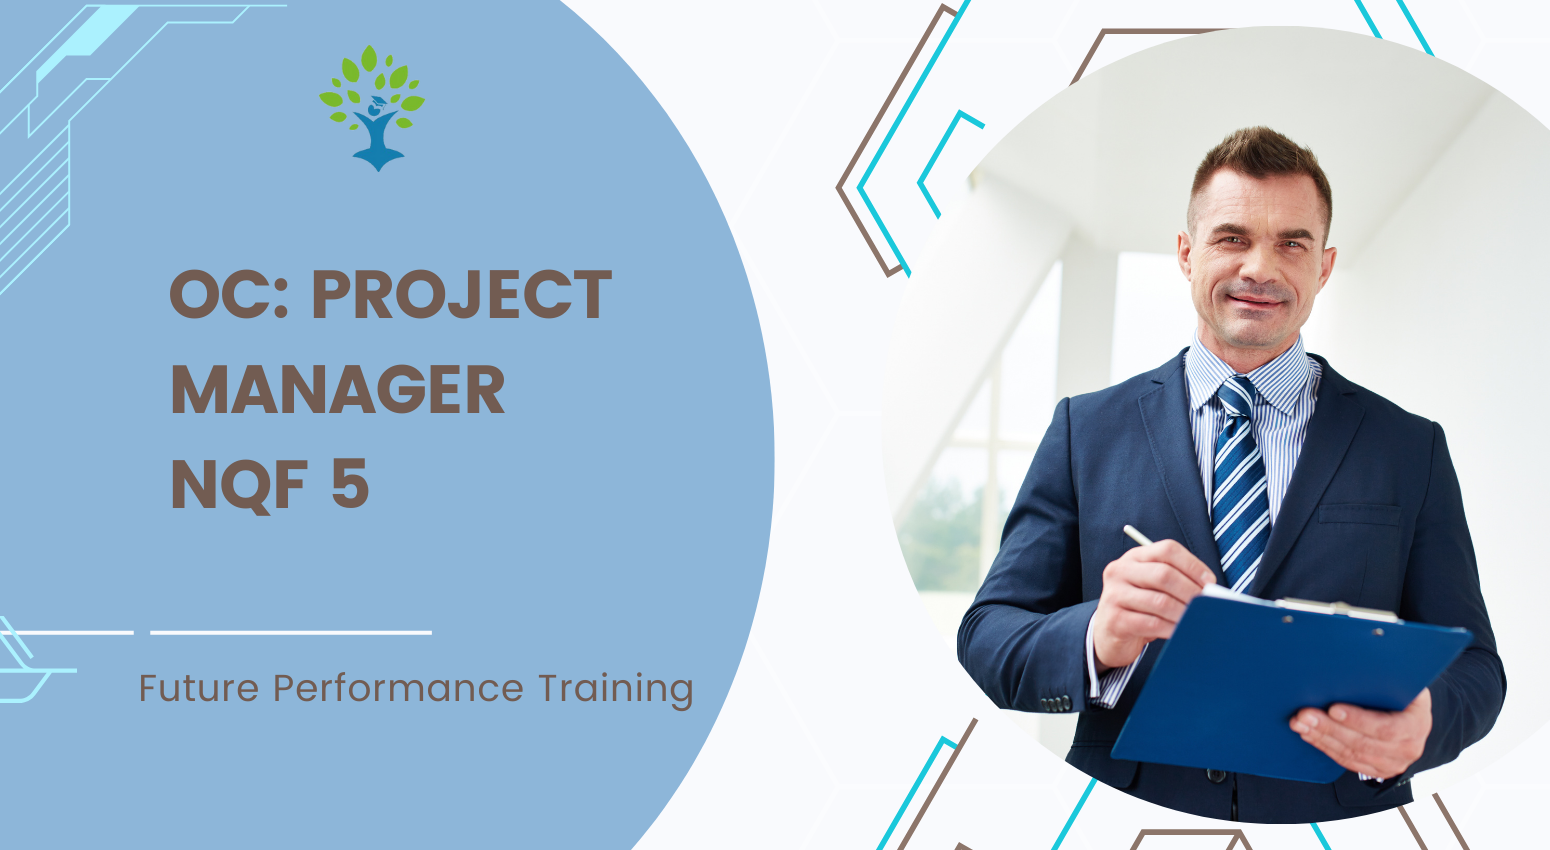 OC: Project Manager NQF 5